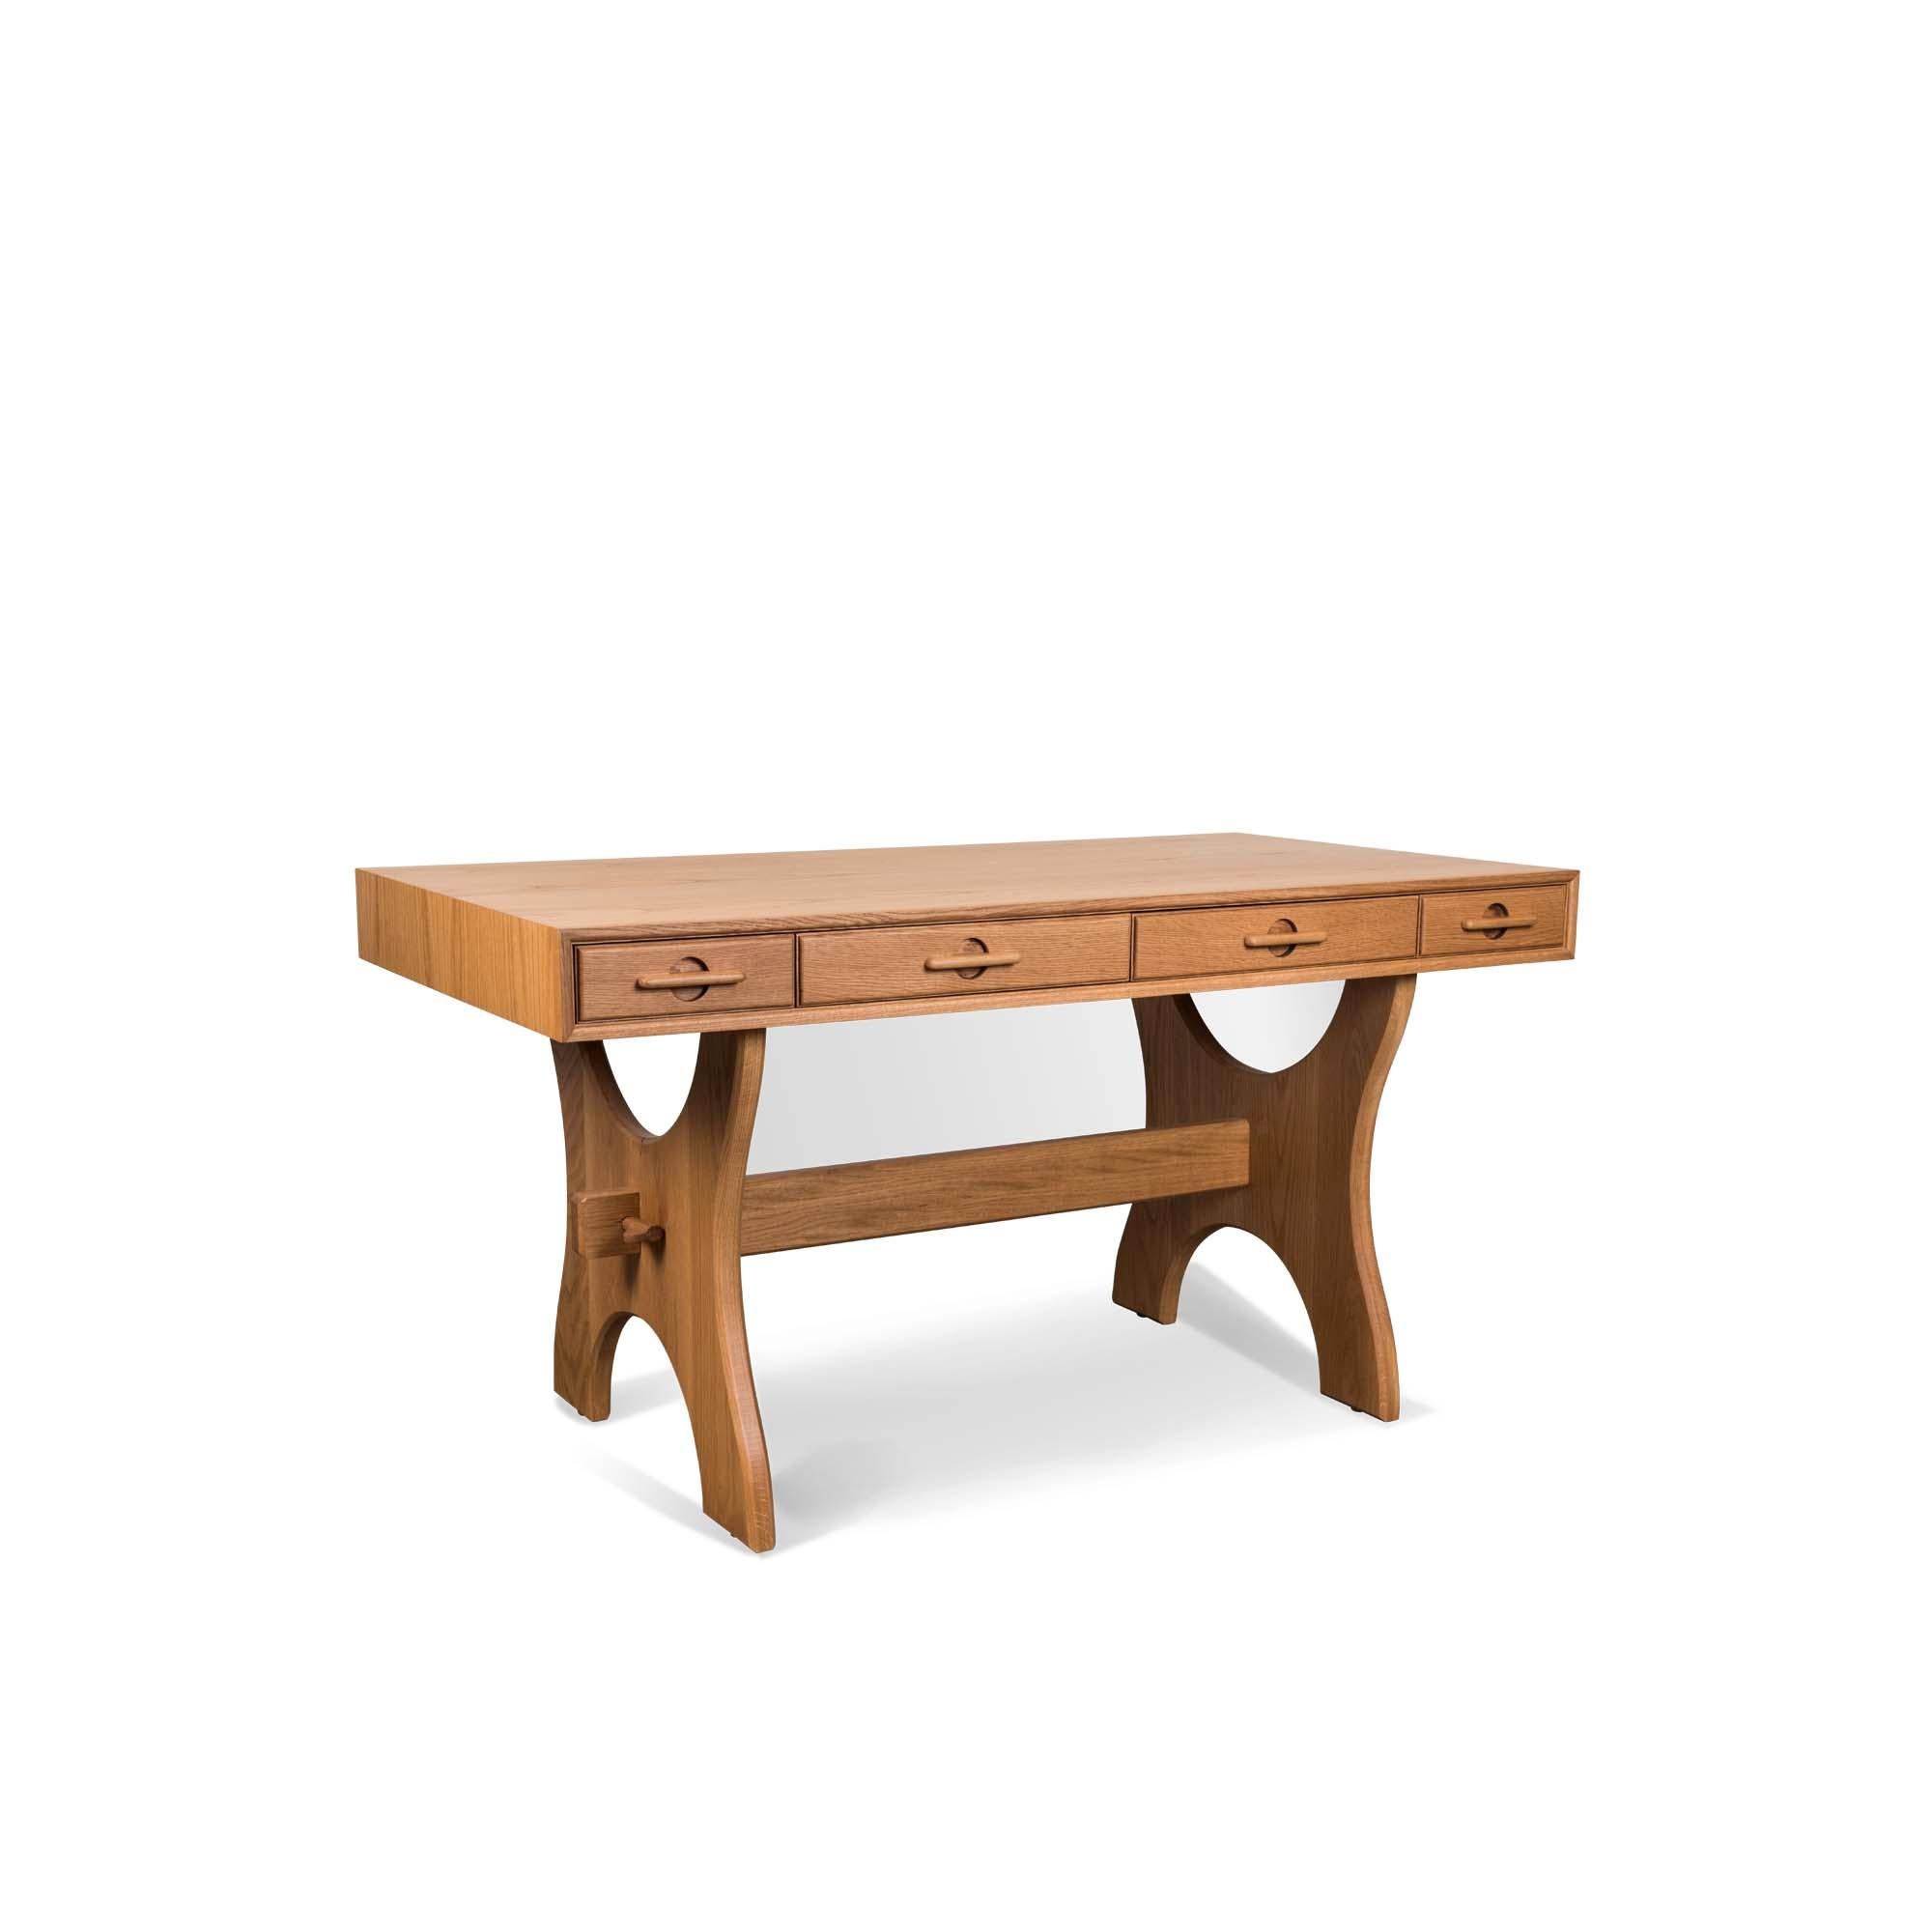 The Ojai desk has four drawers and features solid American walnut or white oak trestle legs. The drawer handles are made of solid carved wood. 

The Lawson-Fenning Collection is designed and handmade in Los Angeles, California.